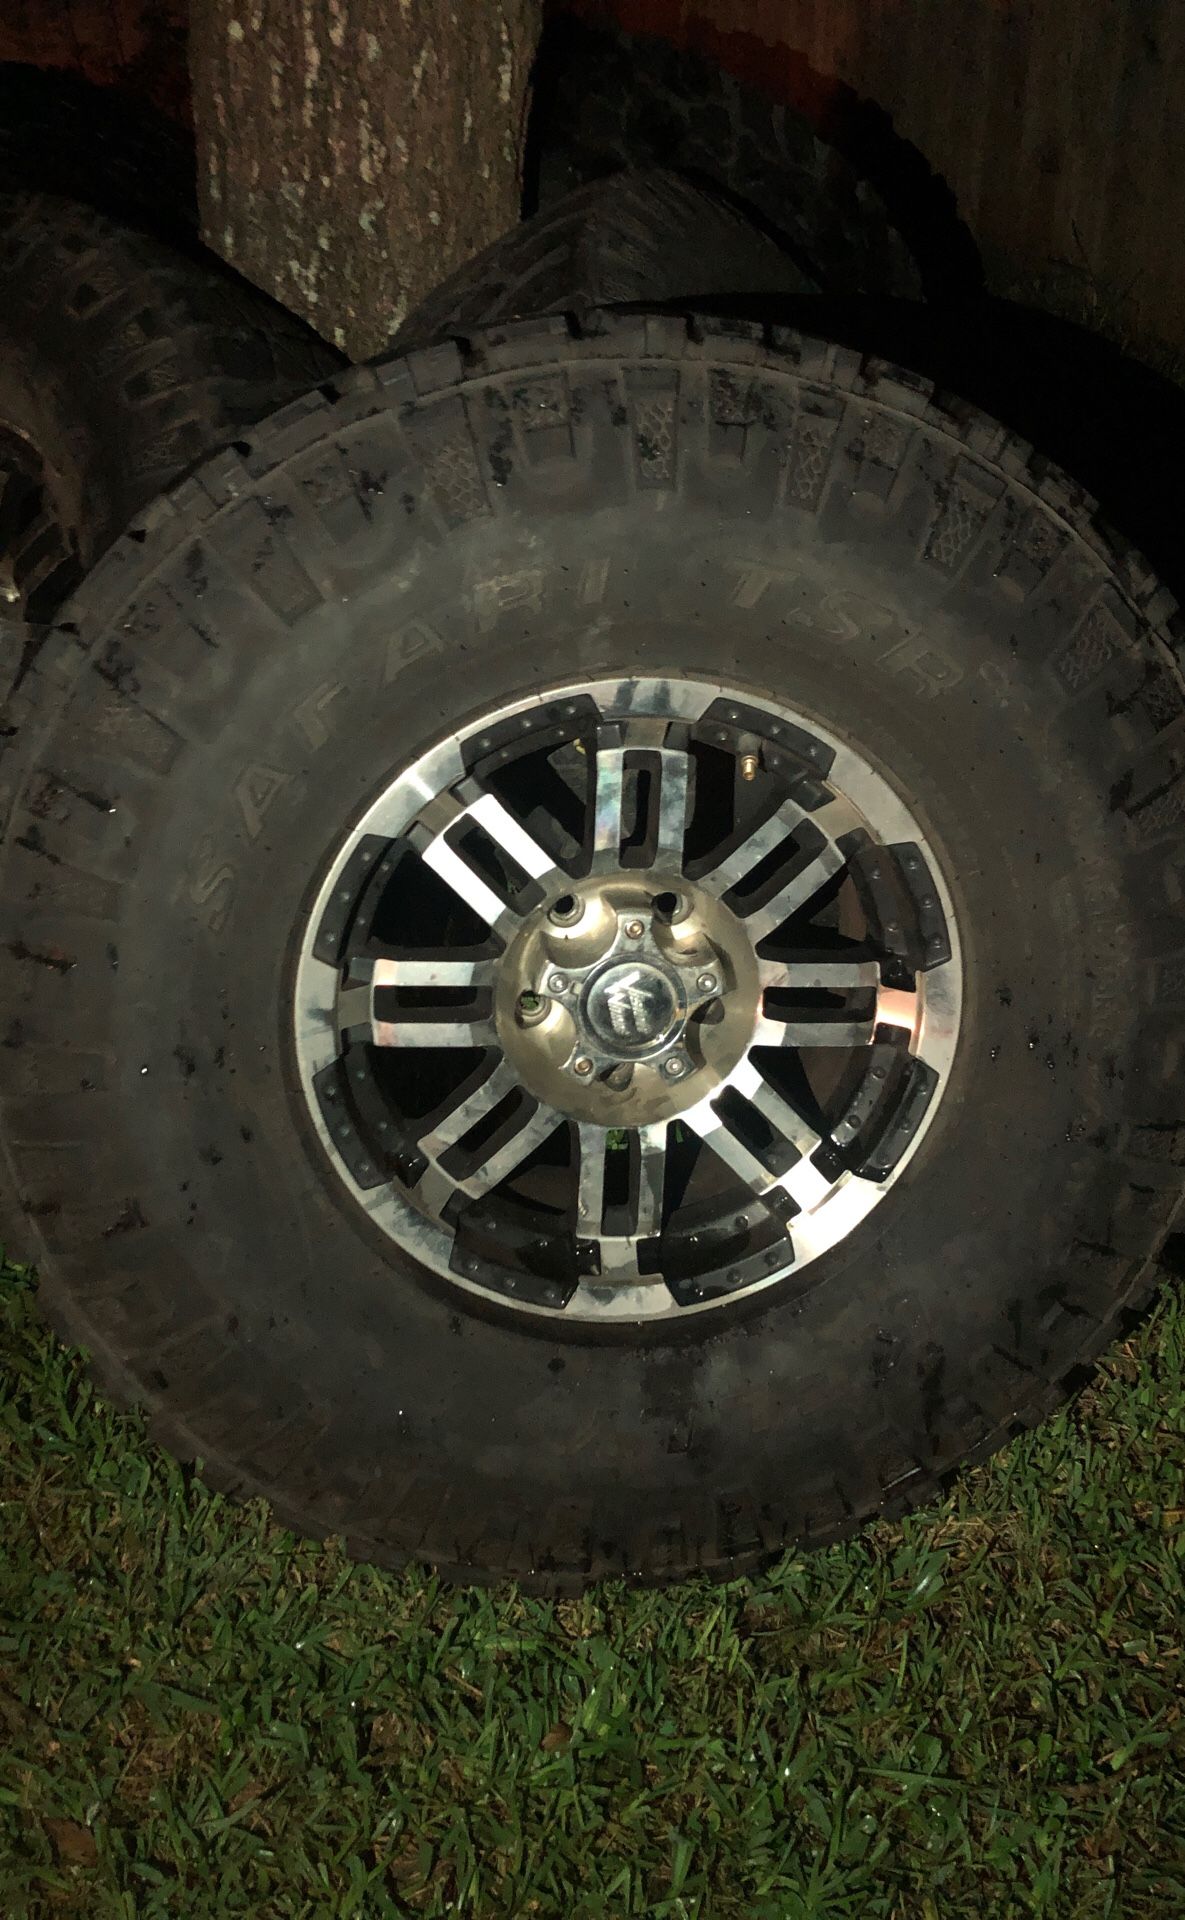 5 - 16” Jeep wheels with 315/75/16 tires —— $600